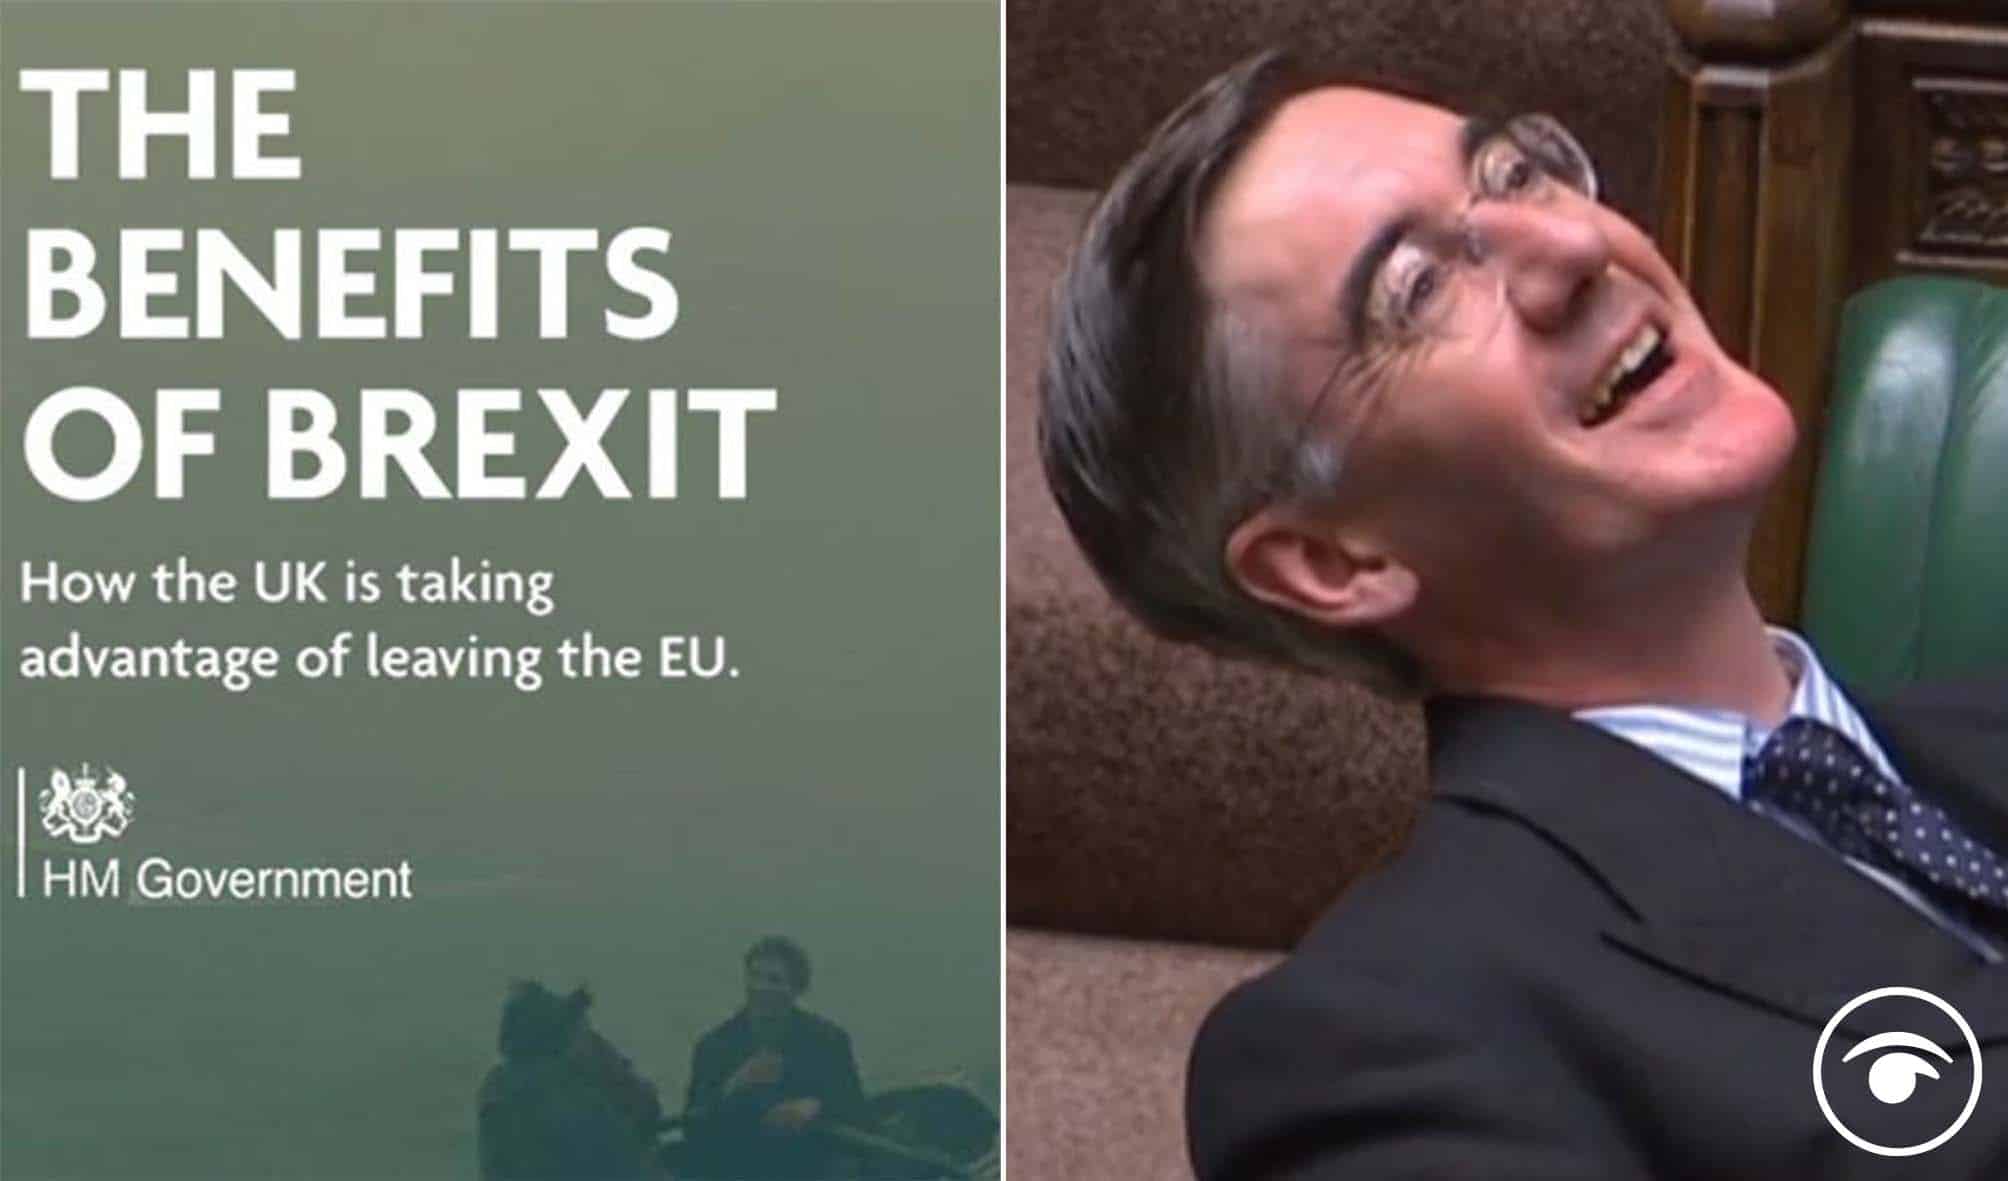 Watch: Is this Rees-Mogg admitting Brexit isn’t that great after all?